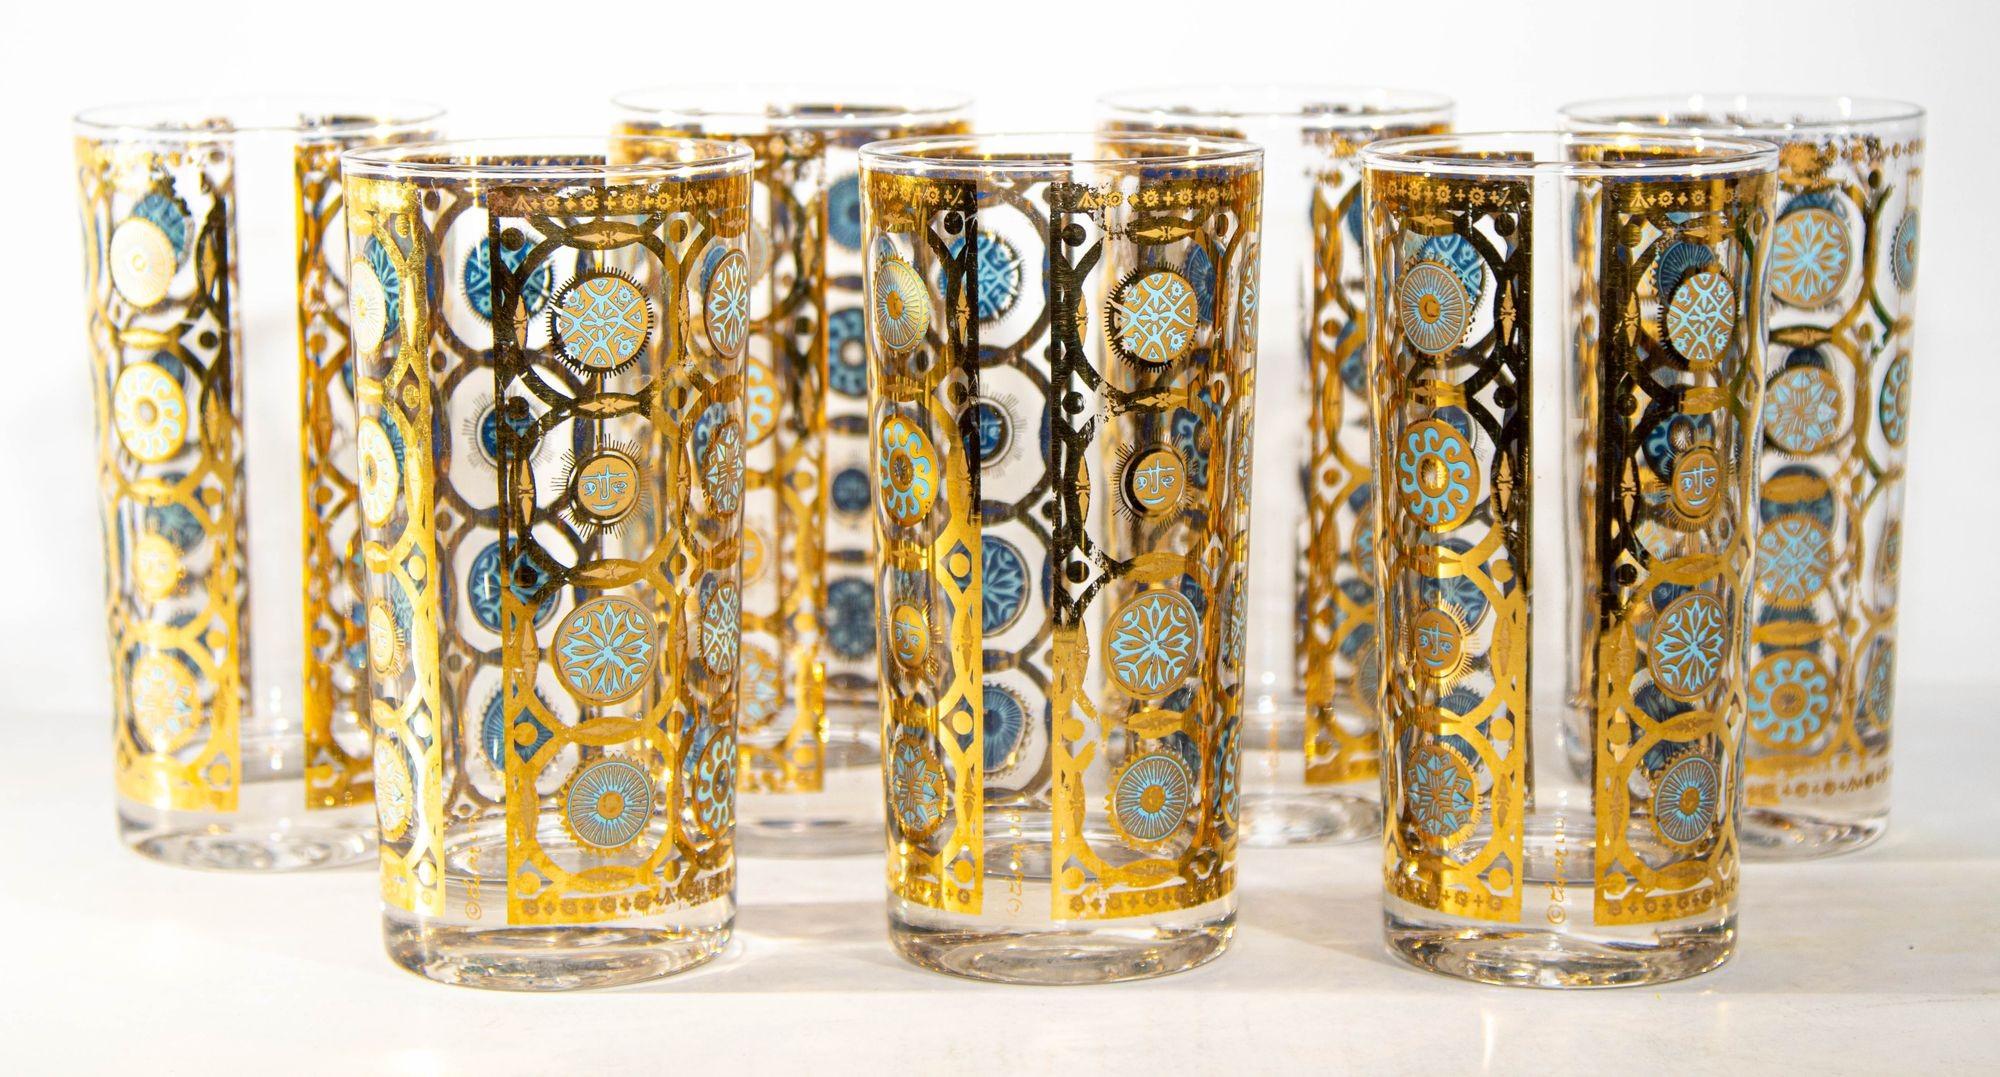 Culver Ltd 22k Gold and Turquoise Signed Glassware Barware Set of 7, circa 1960s 9